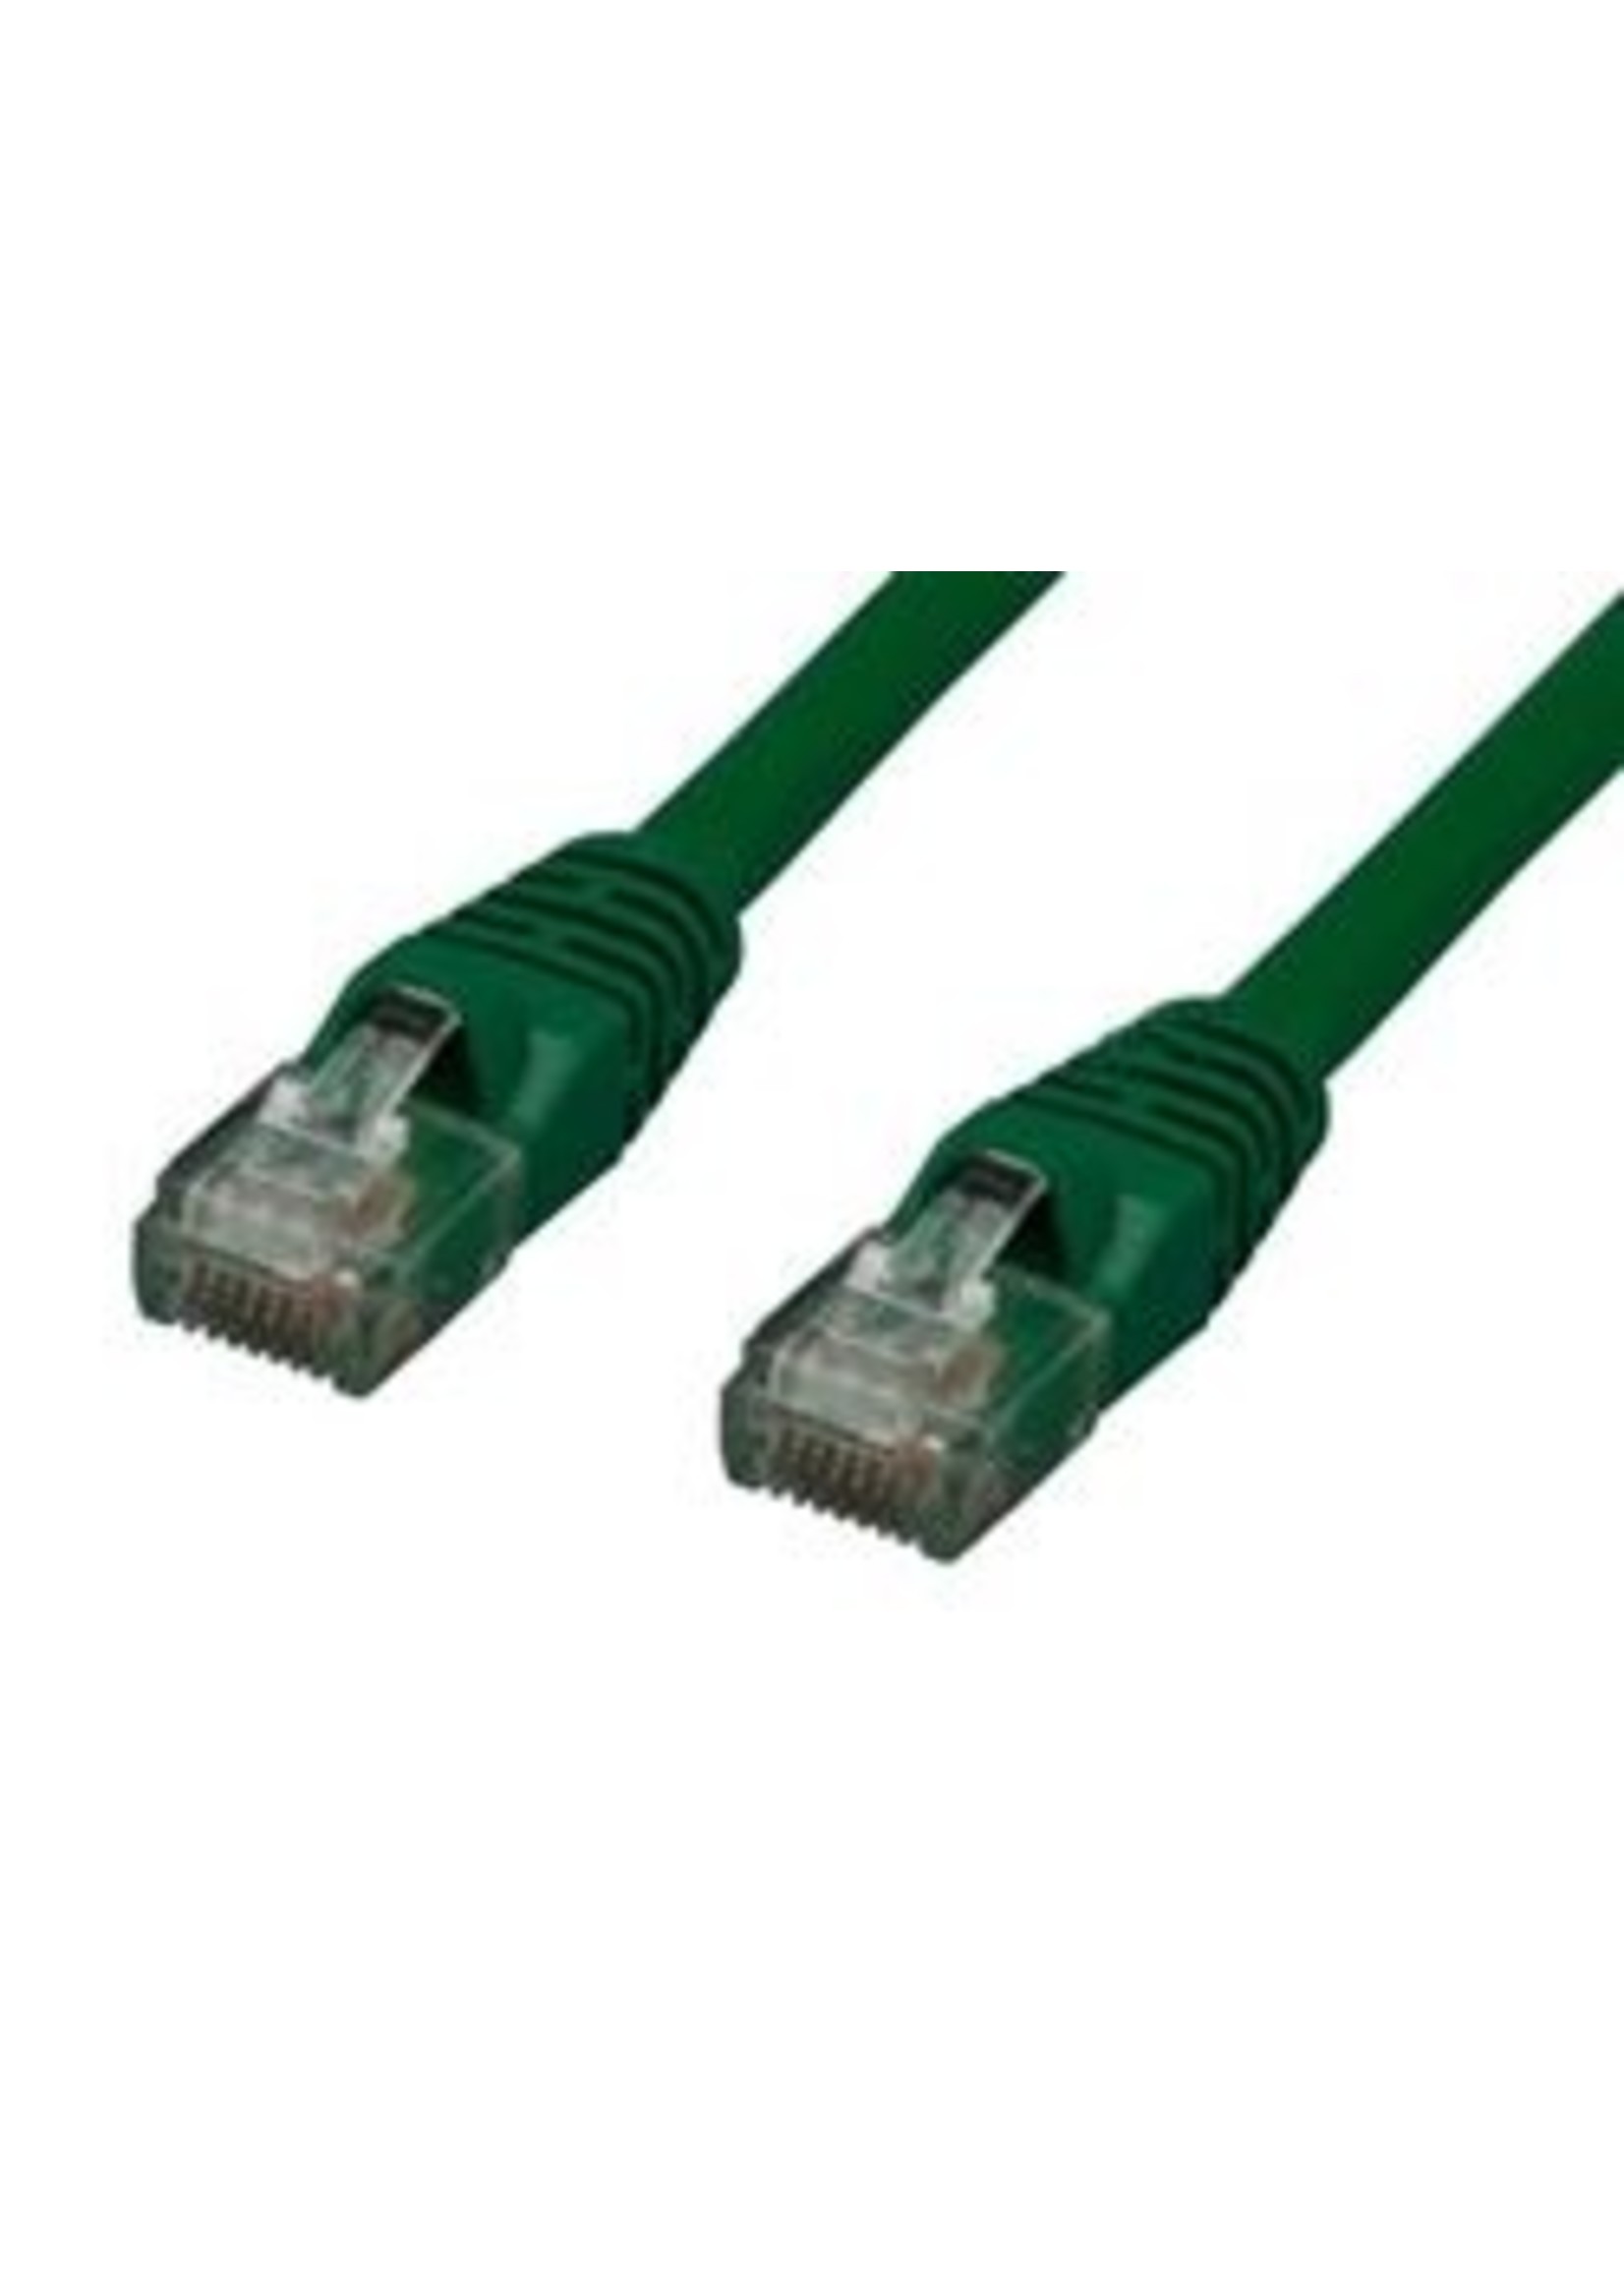 Tripp Lite 7' Cat6 Green Patch Cable